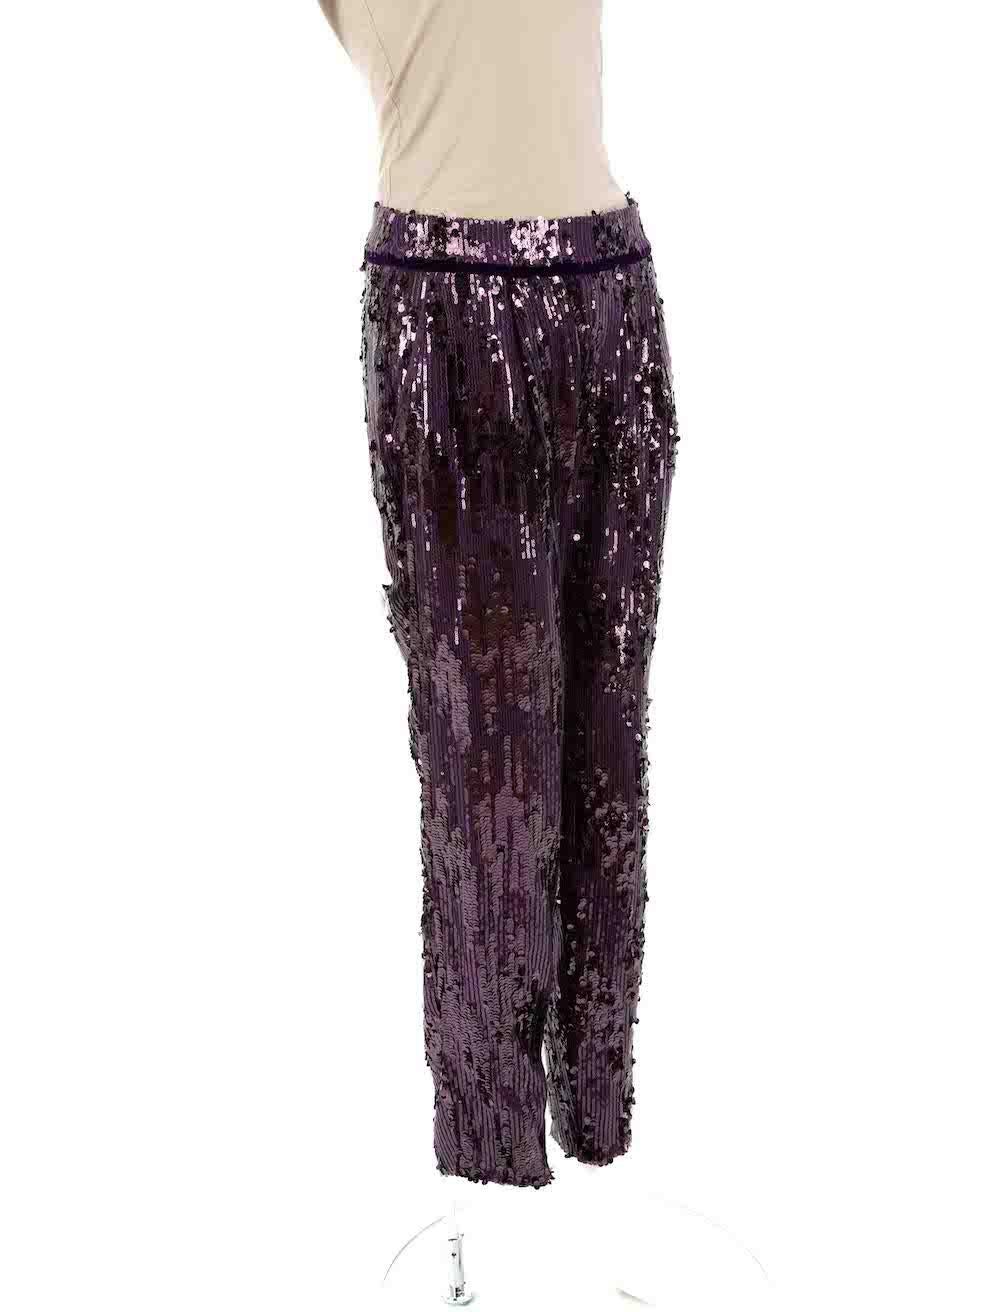 CONDITION is Very good. Minimal wear to trousers is evident. Minimal wear to hem and waistband where there are small holes and sequins missing on this used Honayda designer resale item.
 
 
 
 Details
 
 
 Purple
 
 Synthetic
 
 Trousers
 
